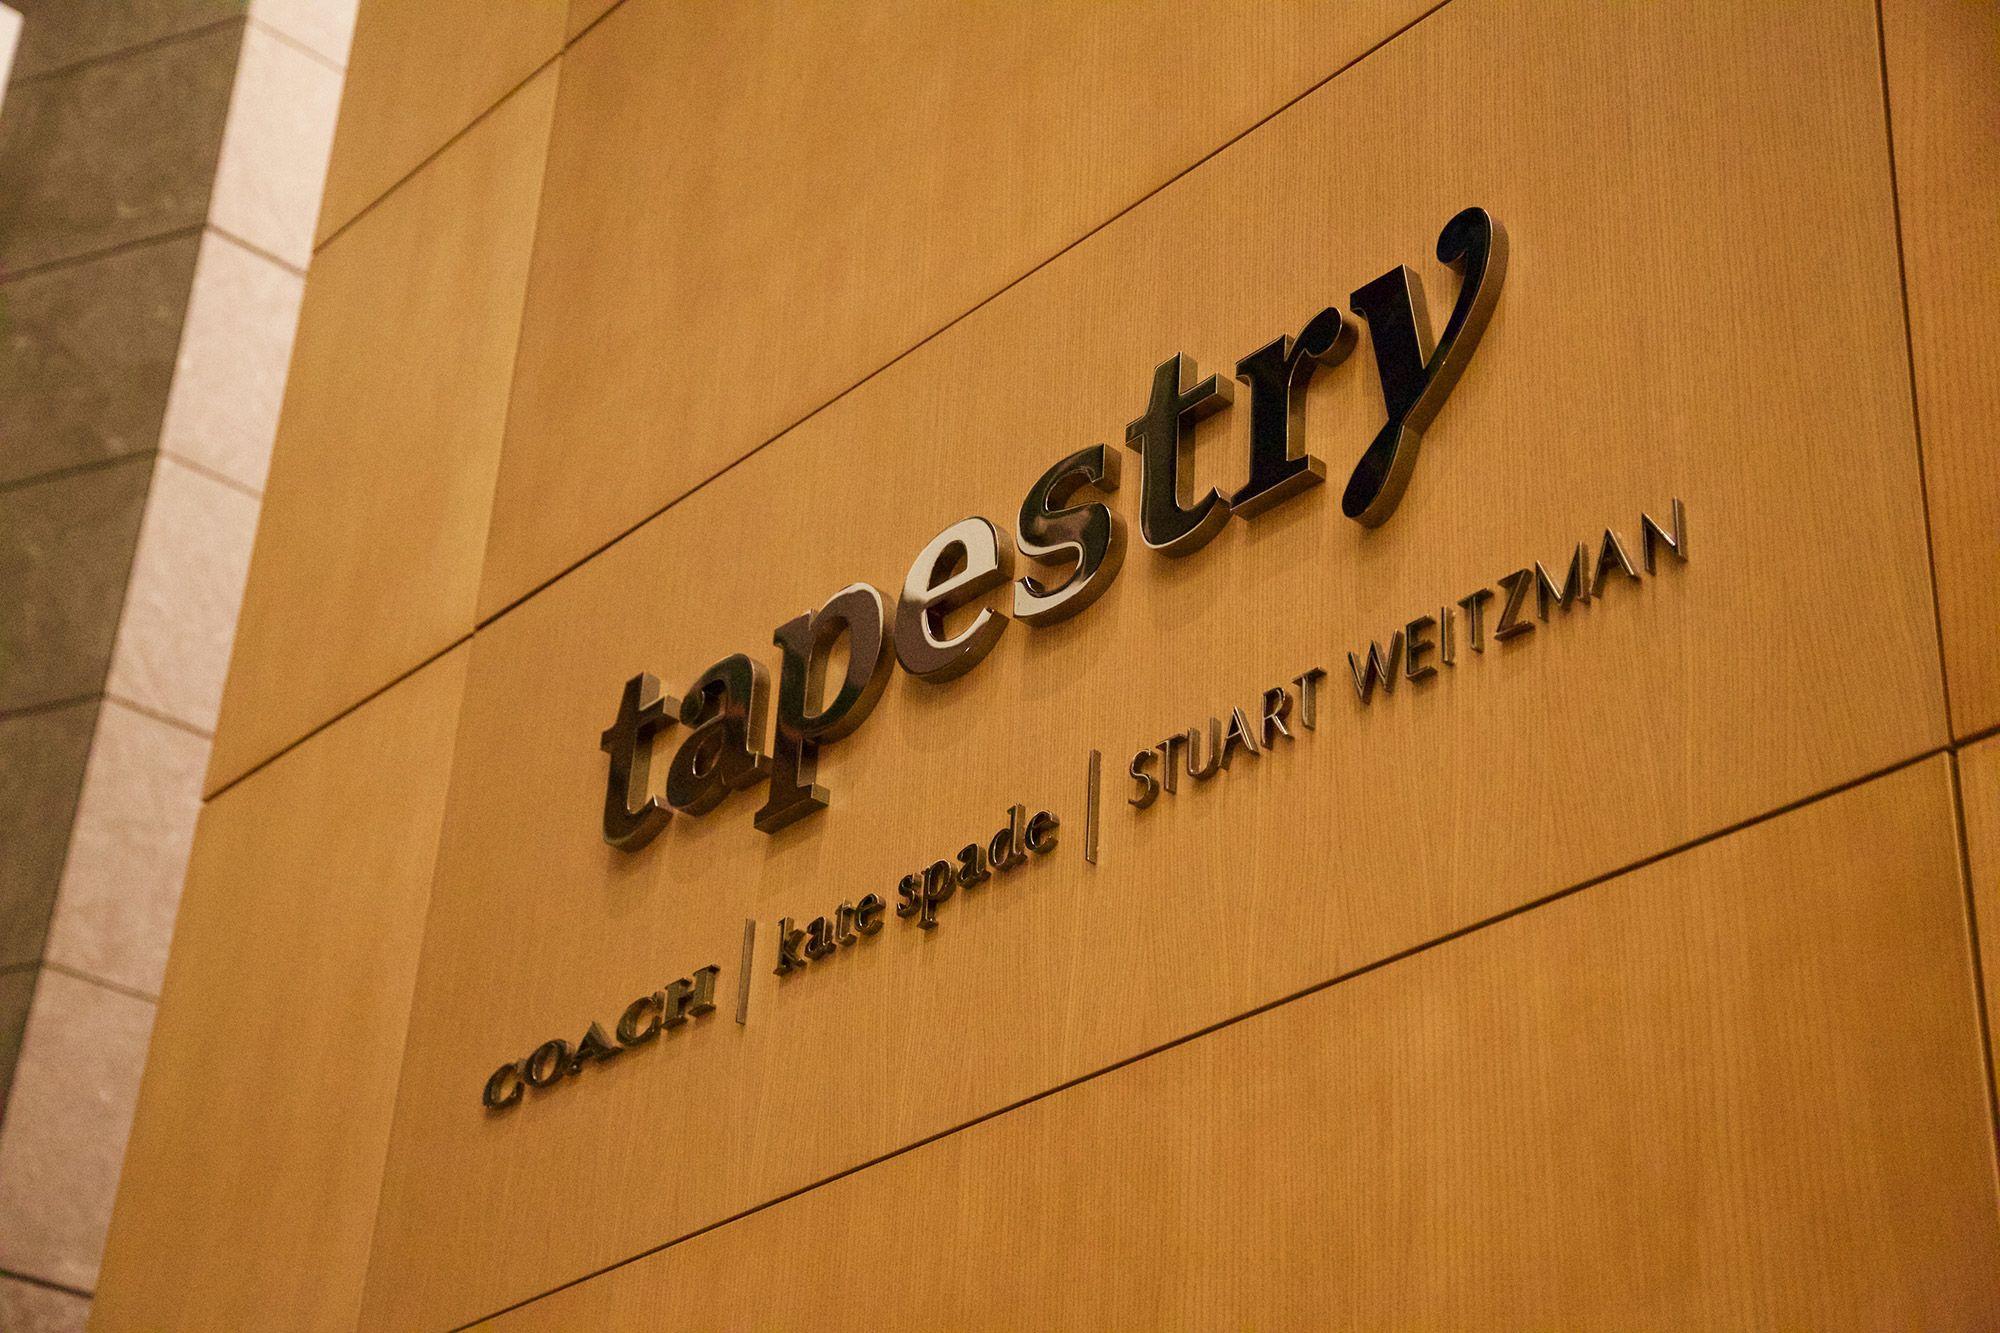 Tapestry Logo - Coach reveals new name Tapestry to negative reaction